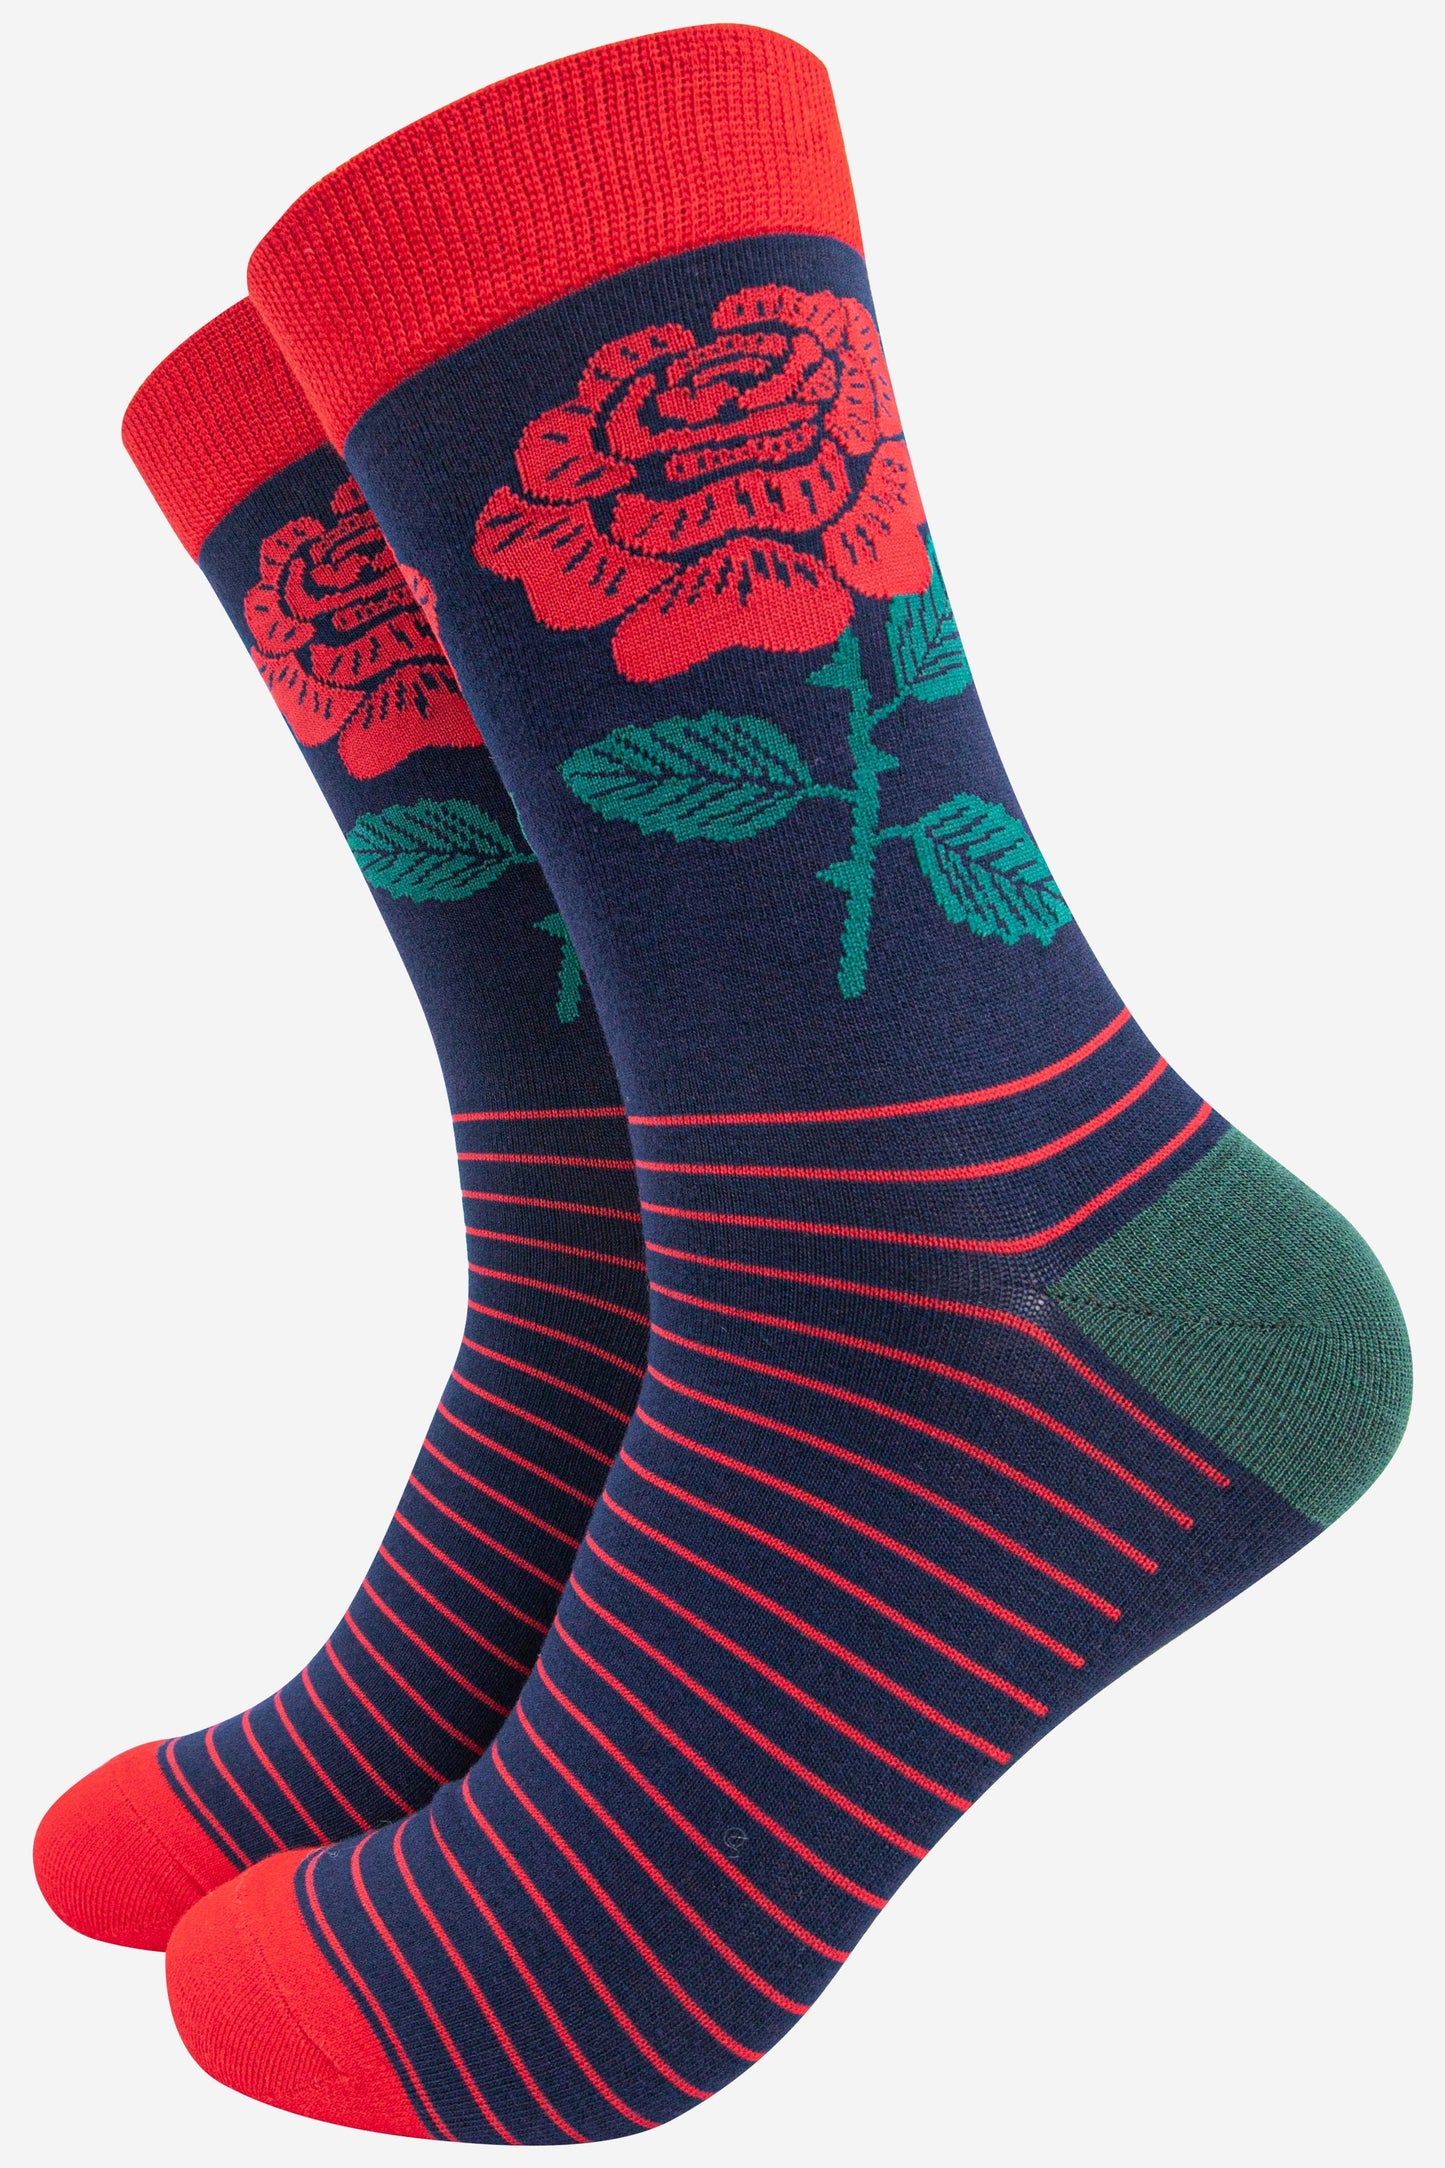 mens bamboo socks with a red english rose motif and striped pattern